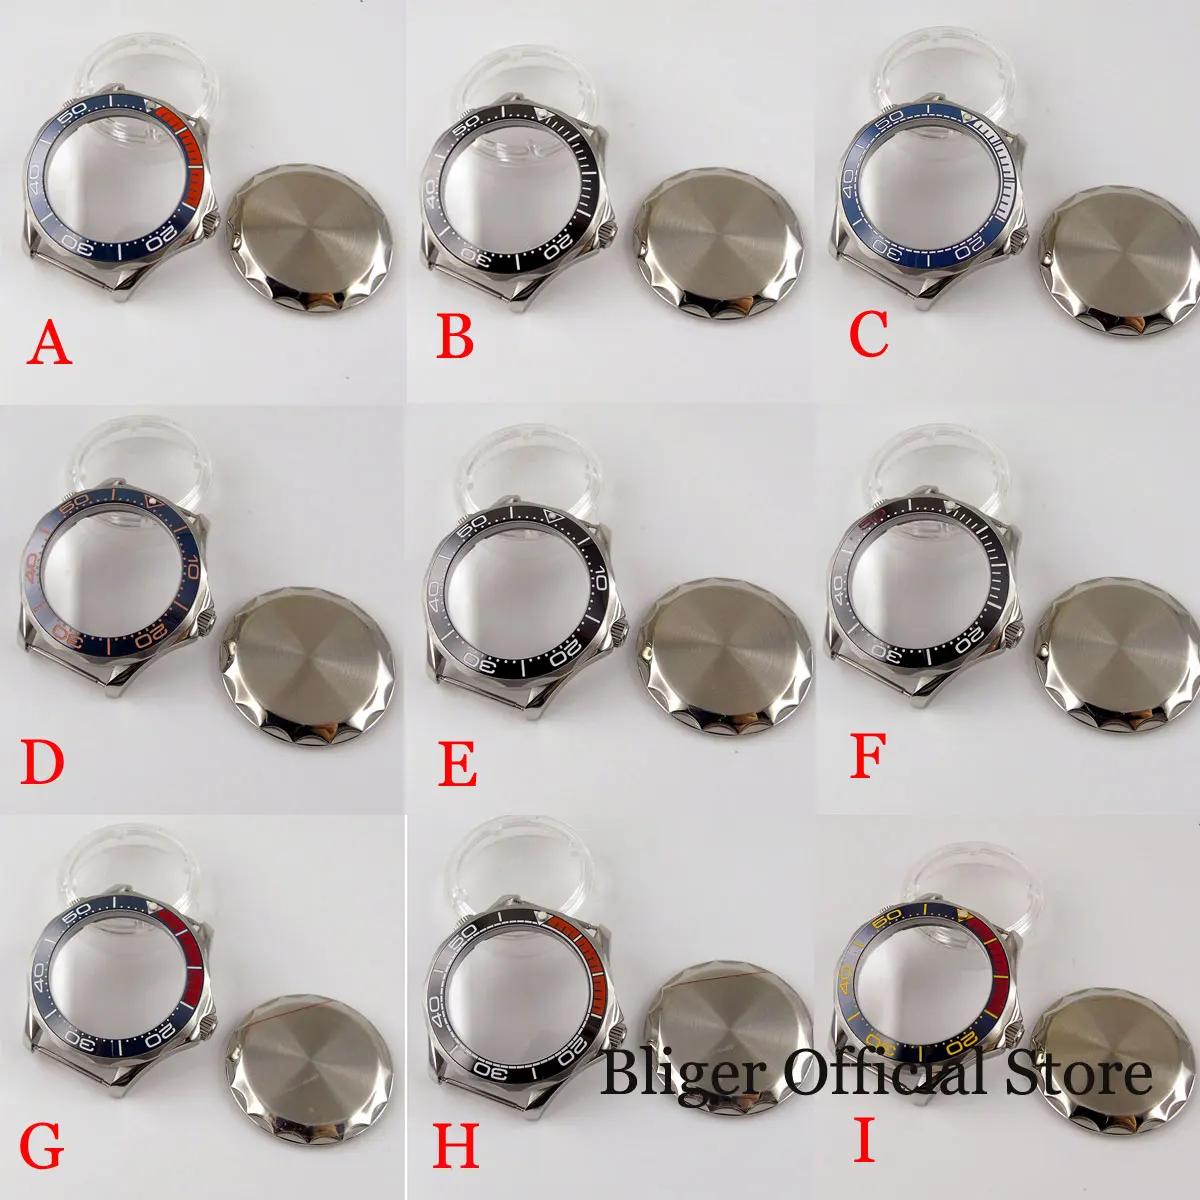 BLIGER Automatic Watch Case fit NH35A NH36A MIYOTA 8215 MINGZHU 3804 Seeing Back Ceramic Insert Sapphire Crystal Screwdown Crown